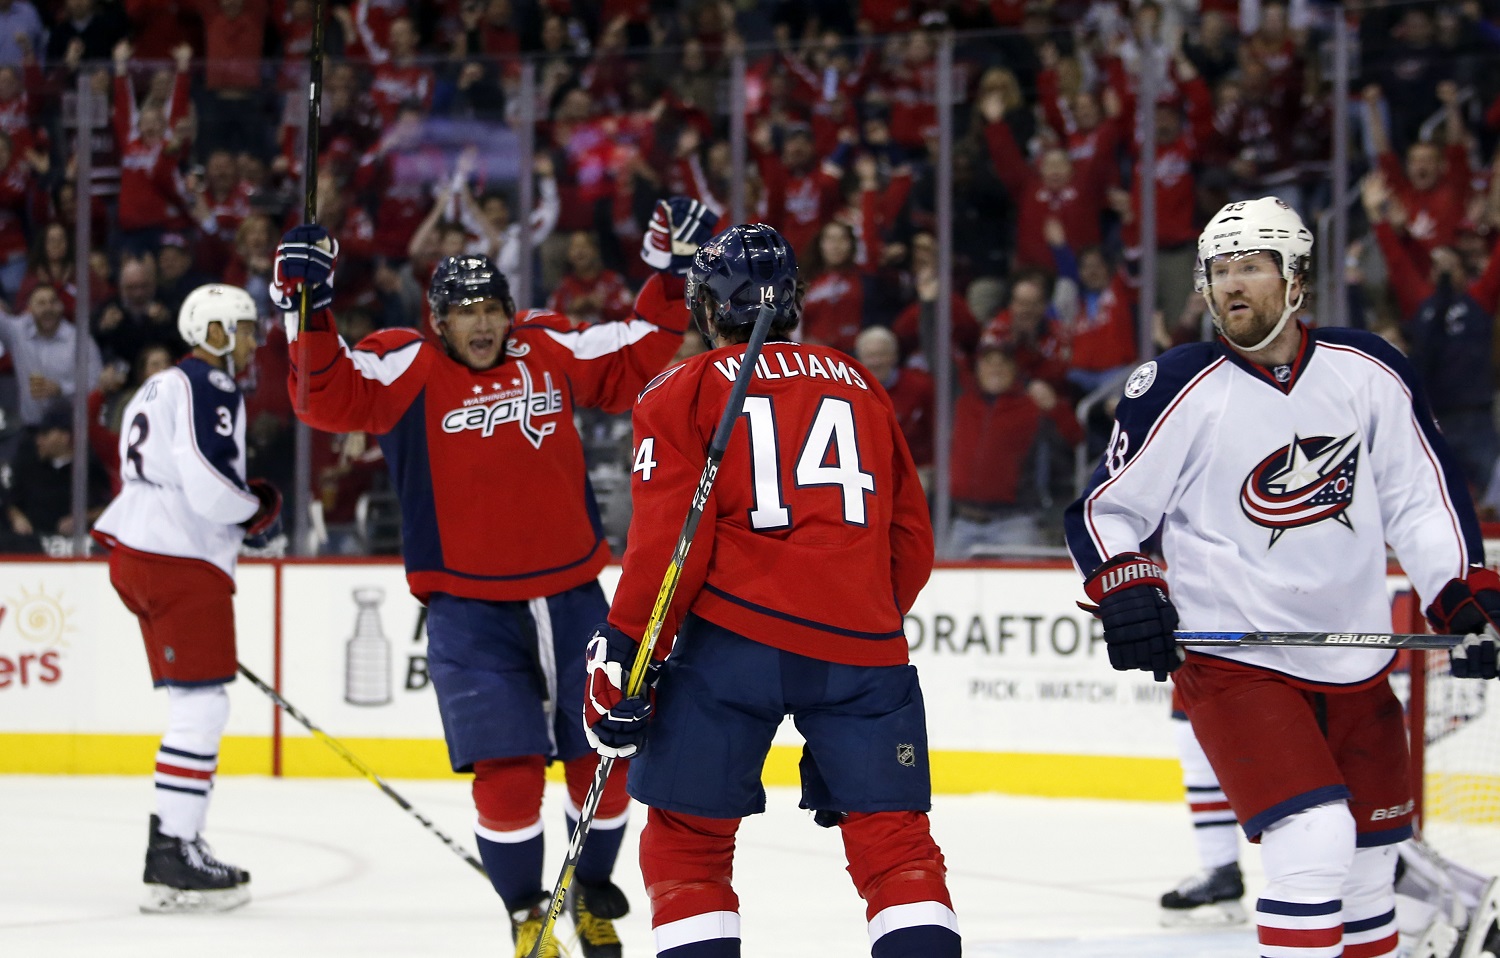 How predictive is the Presidents’ Trophy of Stanley Cup playoff success?